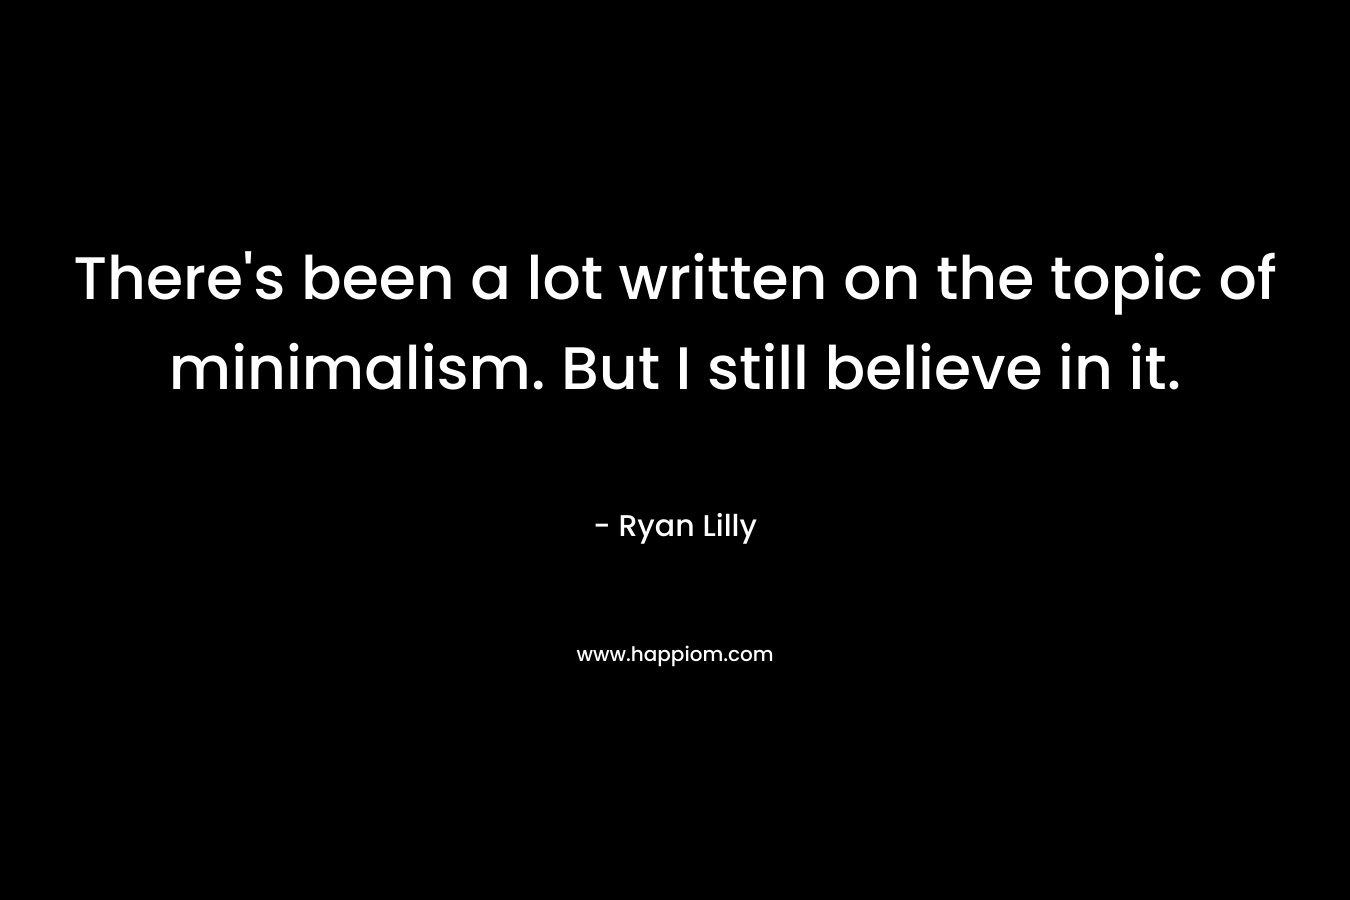 There’s been a lot written on the topic of minimalism. But I still believe in it. – Ryan Lilly